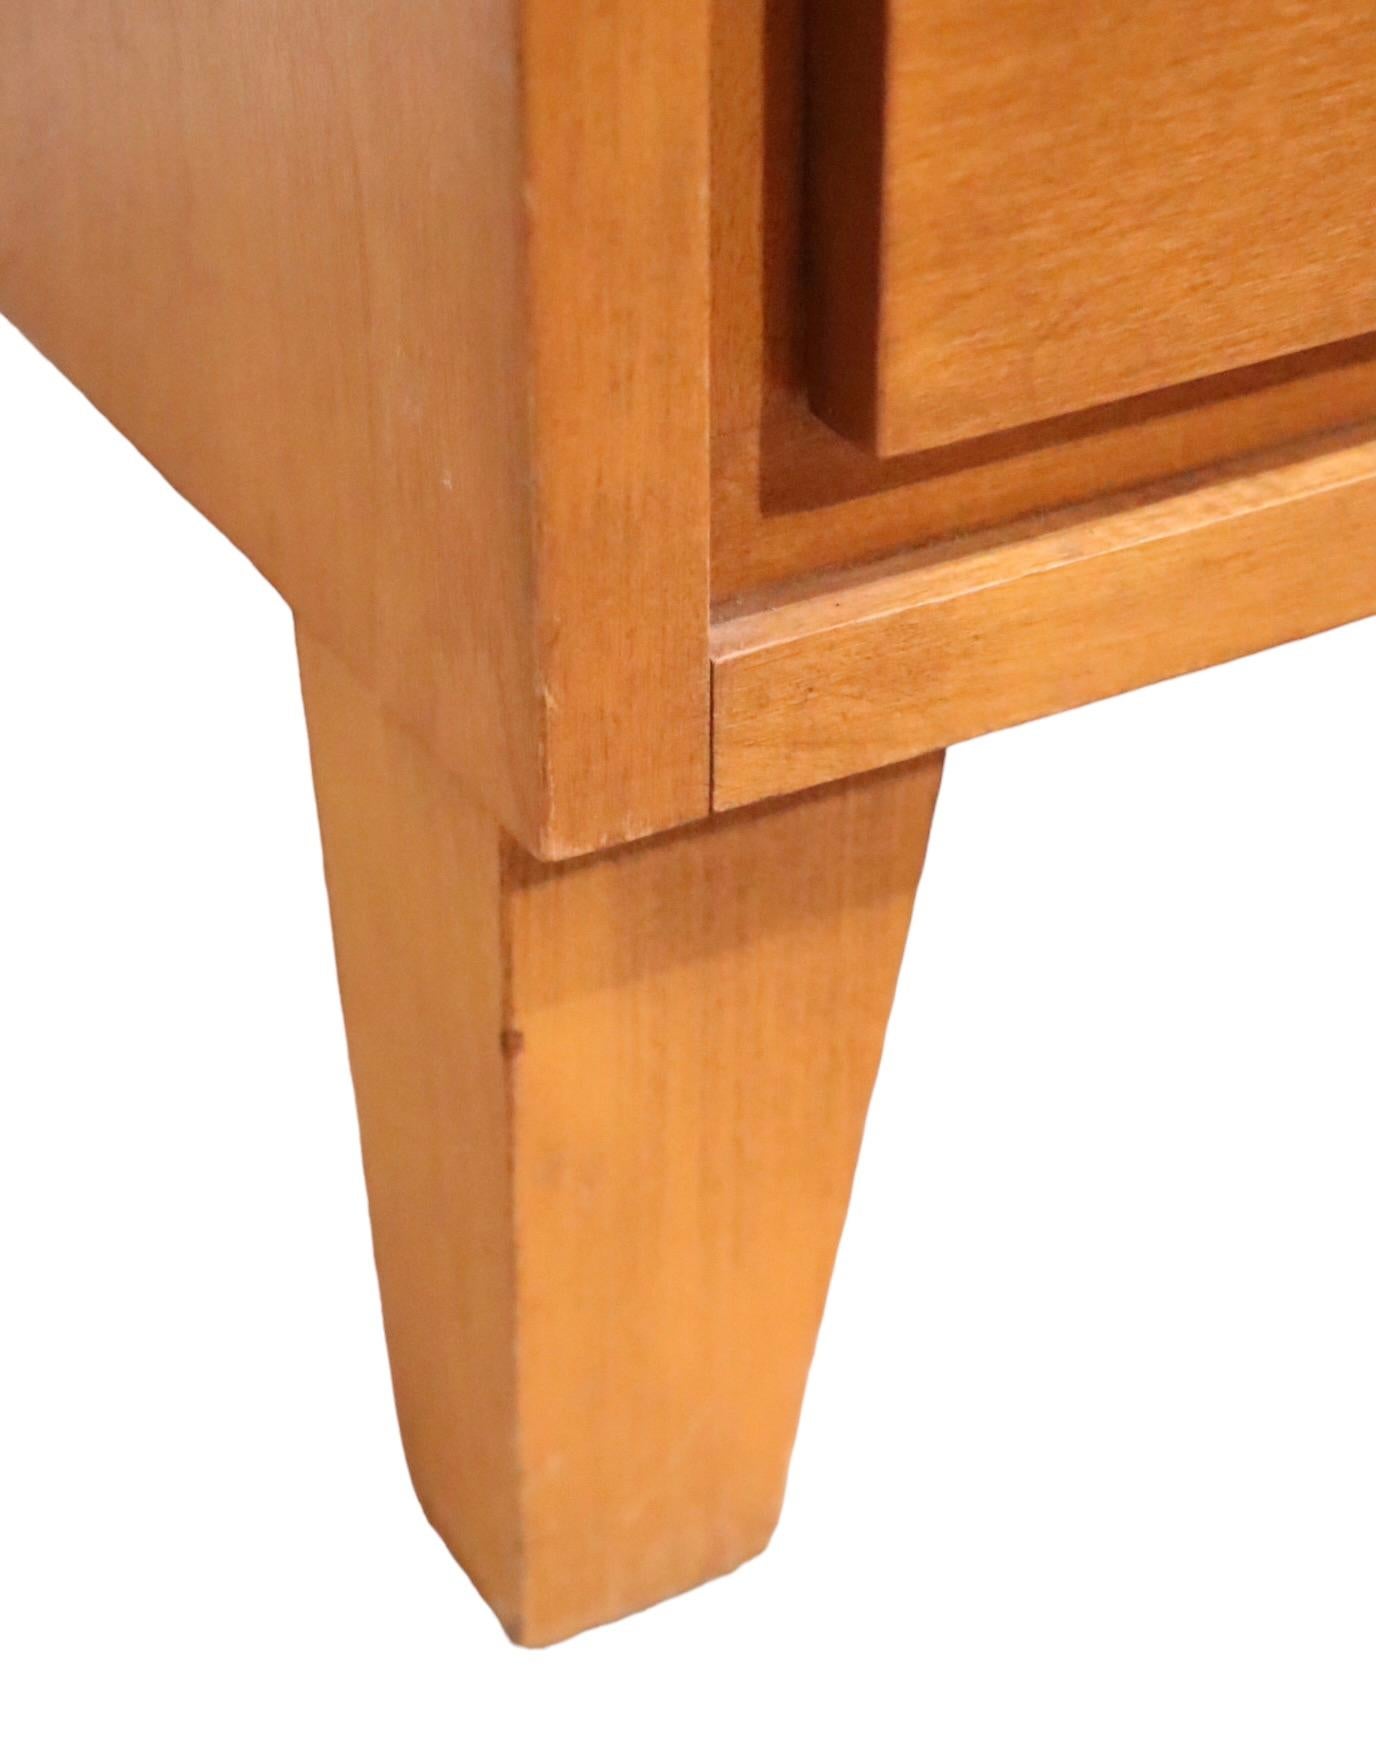   Architectural Mid Century three drawer Bachelors Chest,  designed by Leslie Diamond for Conant Ball,  as part of their hugely successful Modern Mates series, circa 1950's. The piece is  constructed of solid wood, probably birch, and is in